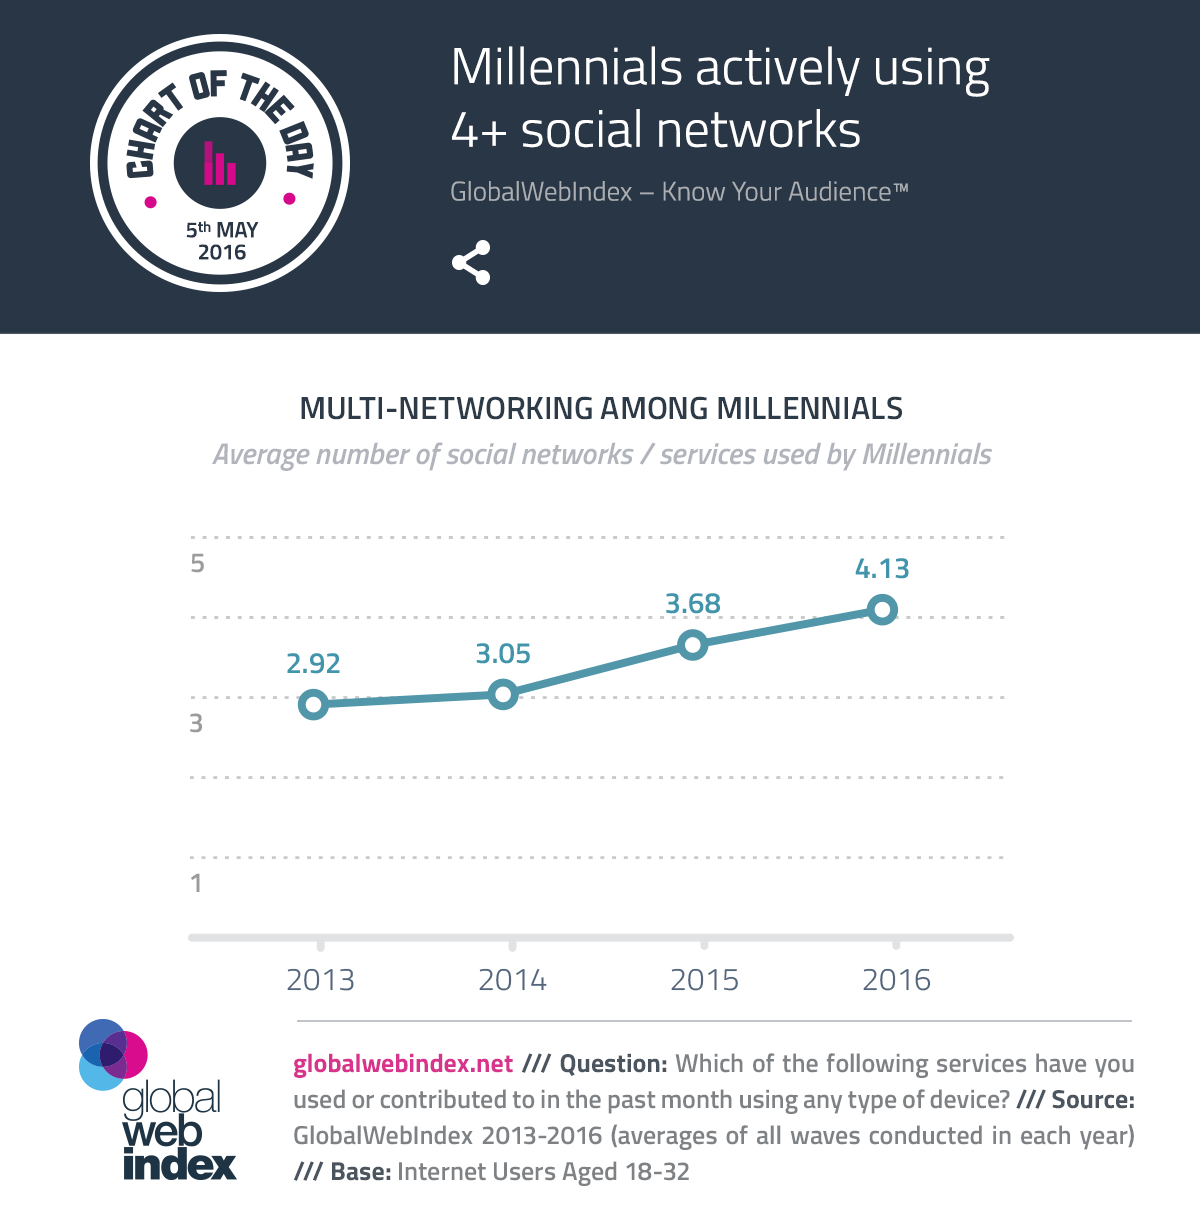 COTD-Charts-5-May-2016-Millennials-actively-using-4-social-networks